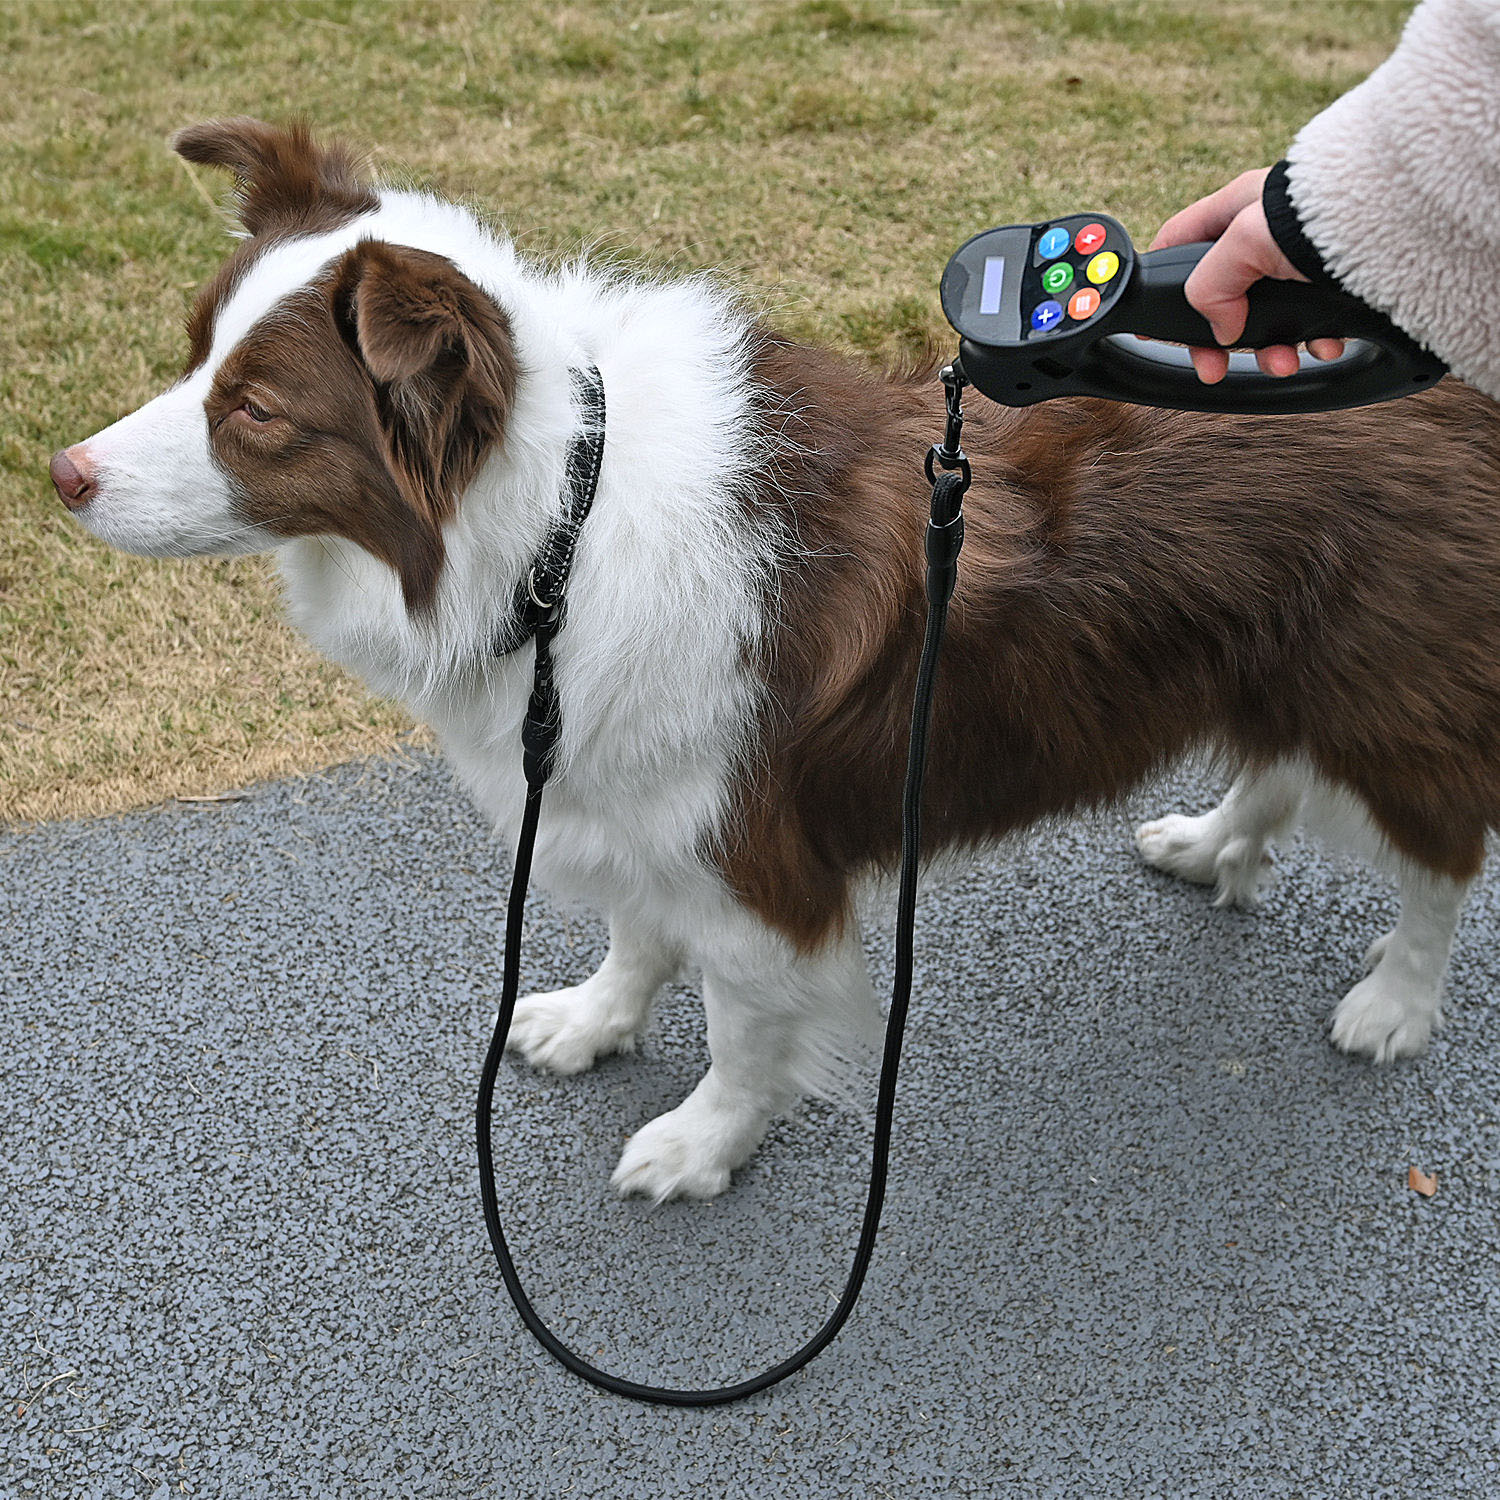  A 2-in-1 dog training collar with a remote control